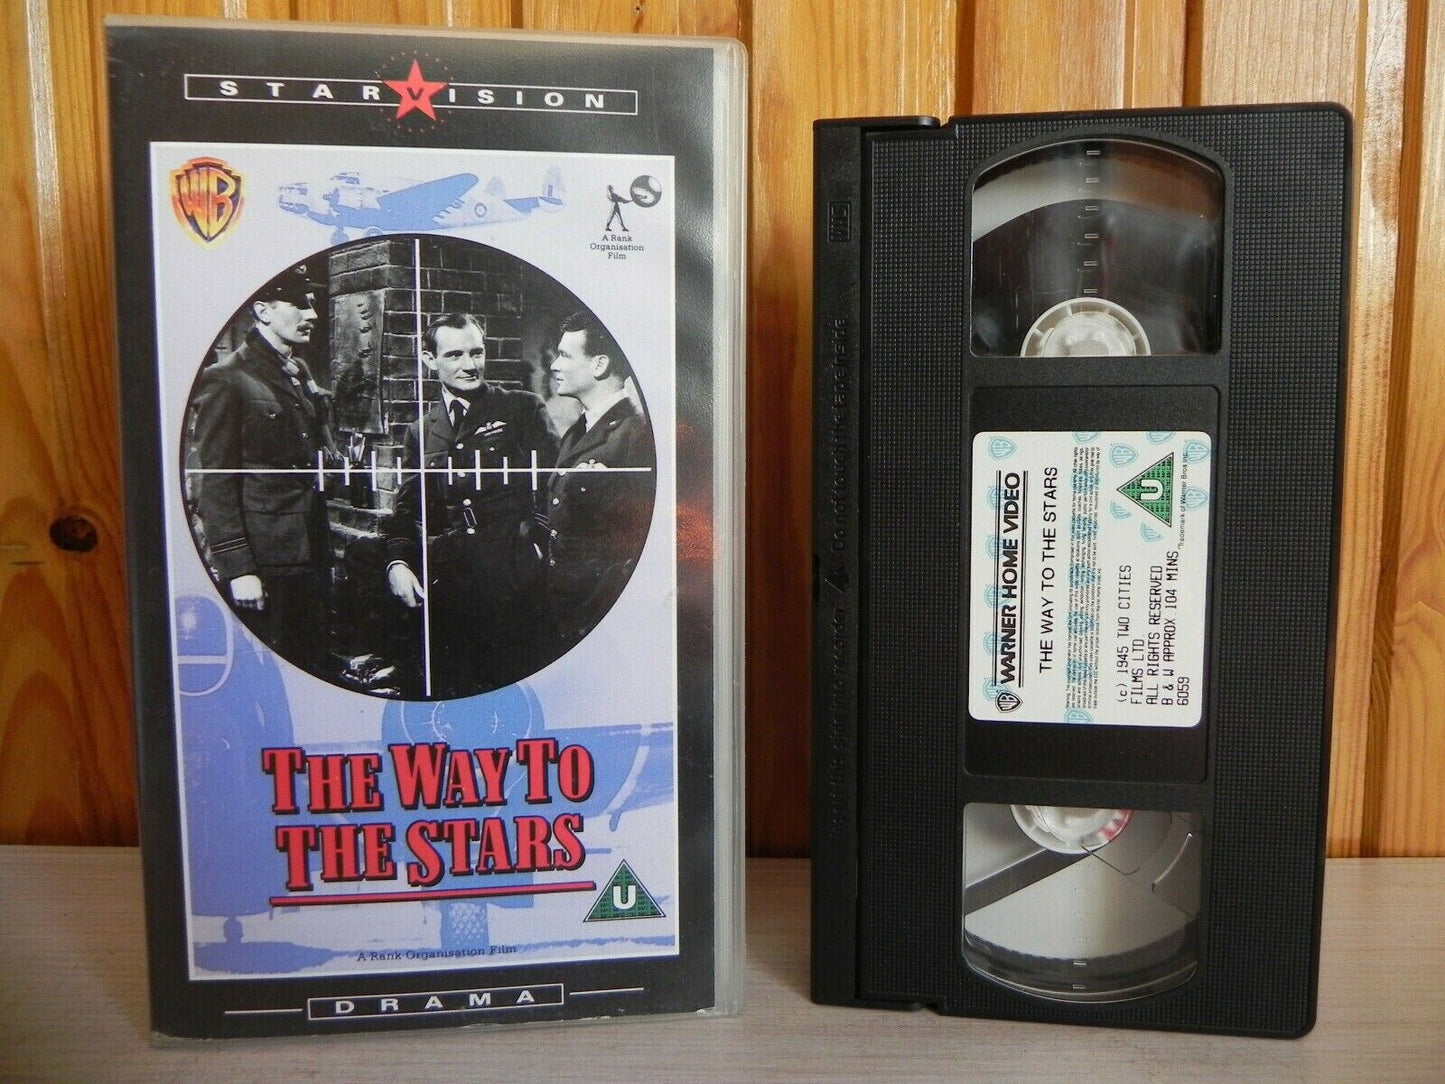 The Way To The Stars - Warner Home Video - Drama - American Air Forces - Pal VHS-